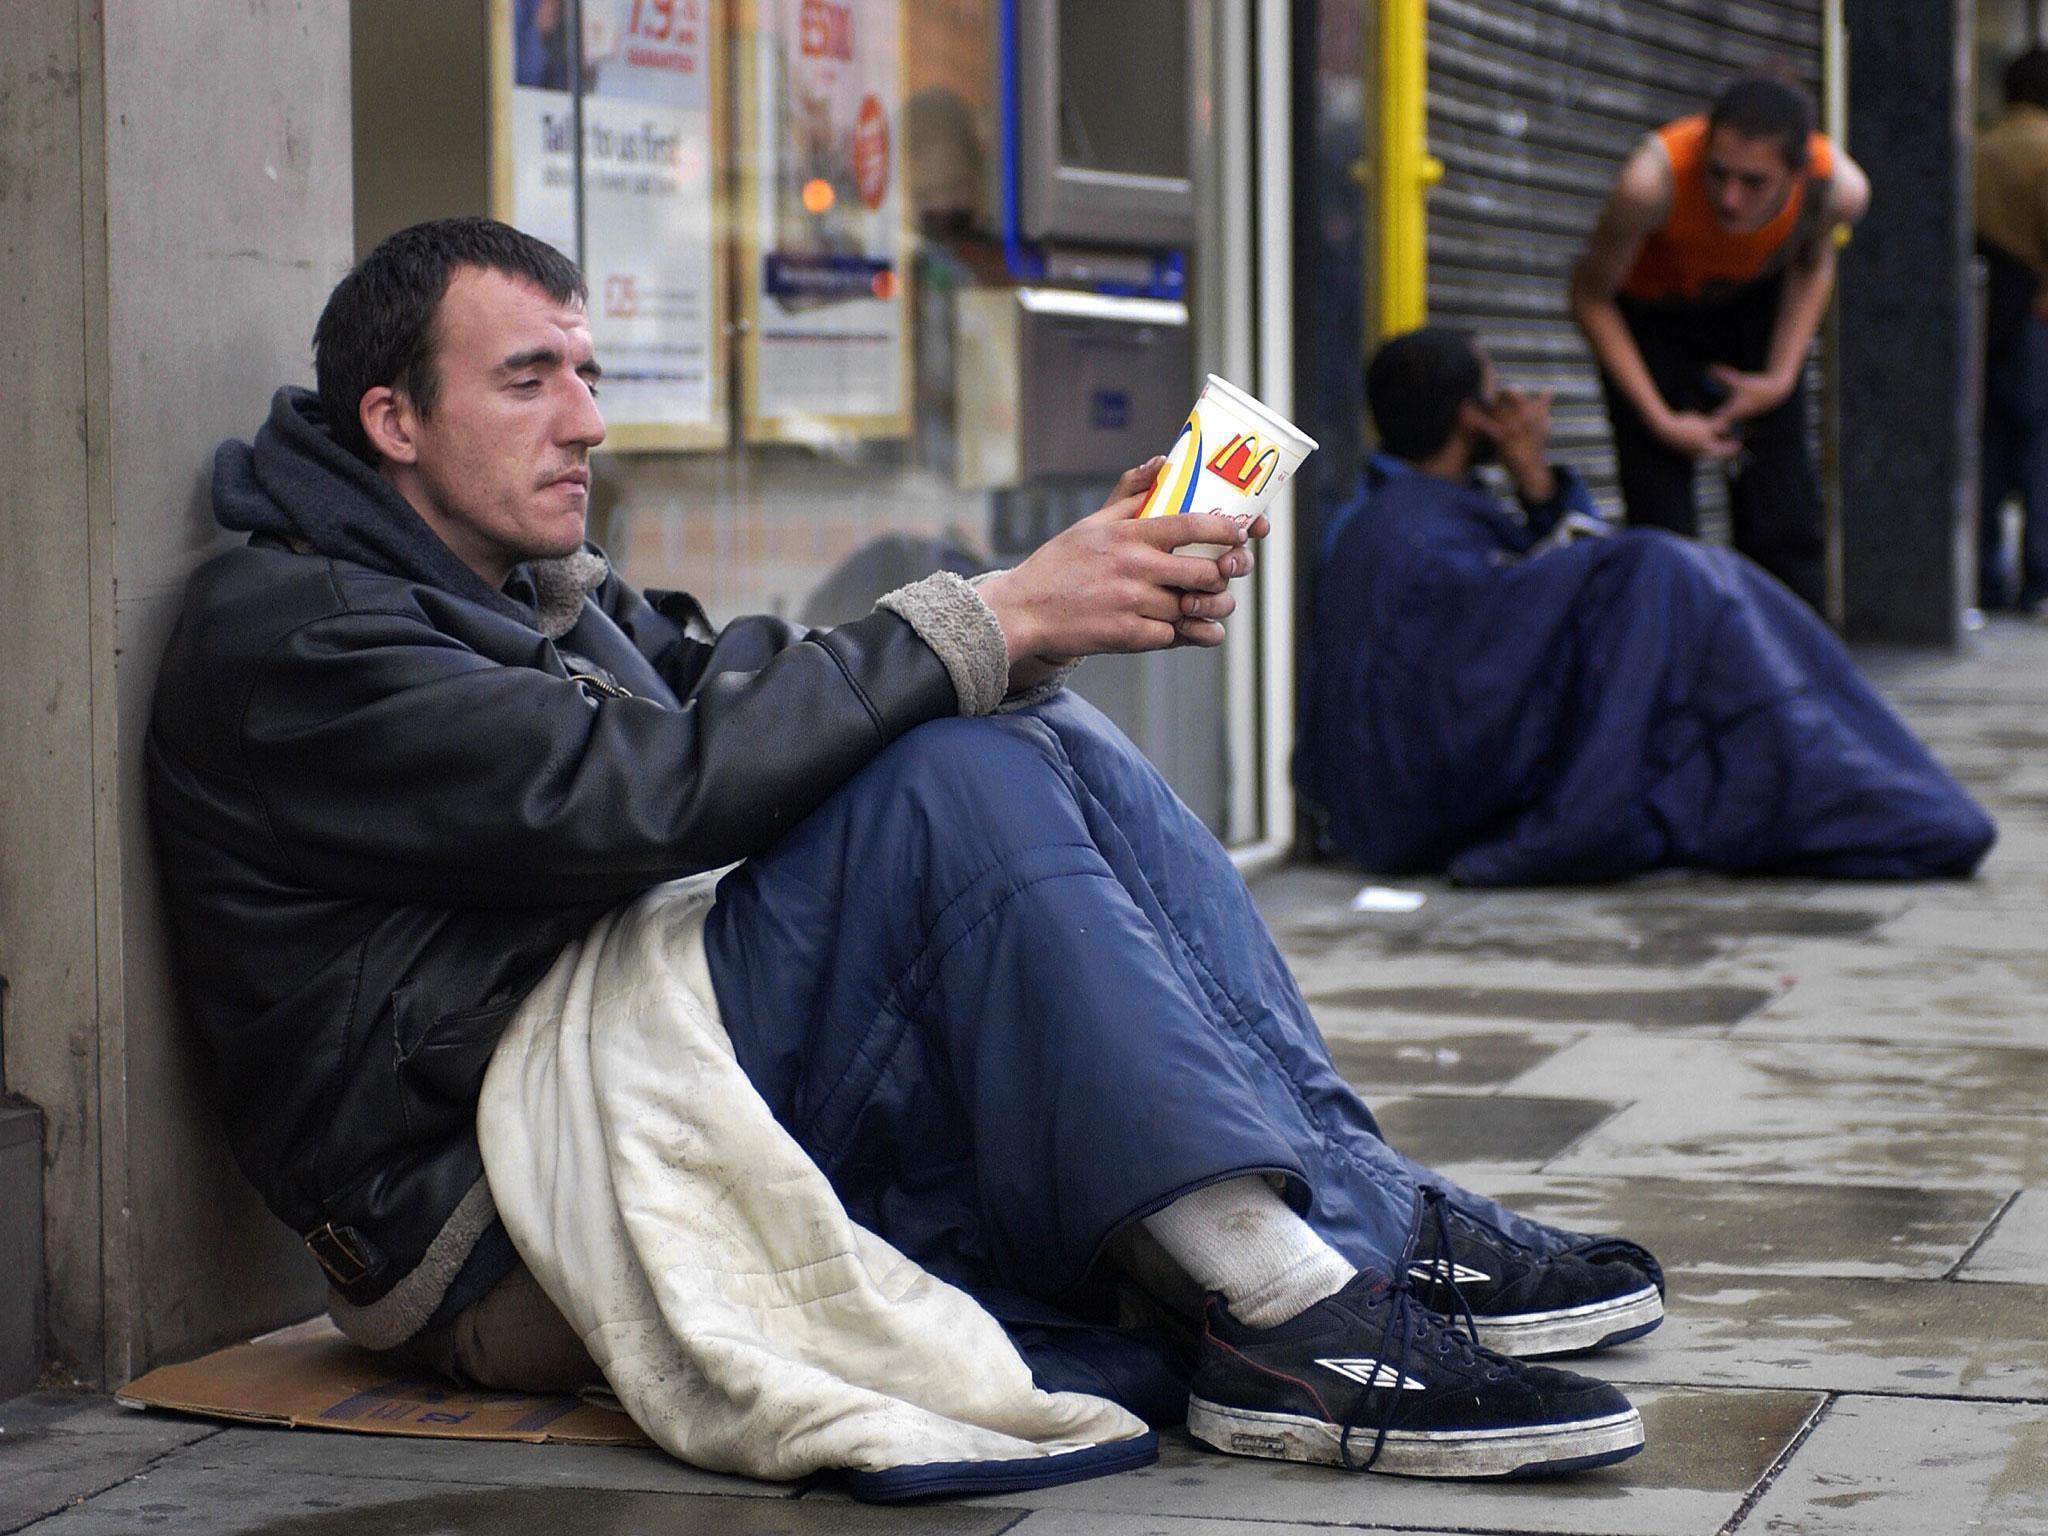 A recent report found more than 300,000 people are now sleeping rough in Britain